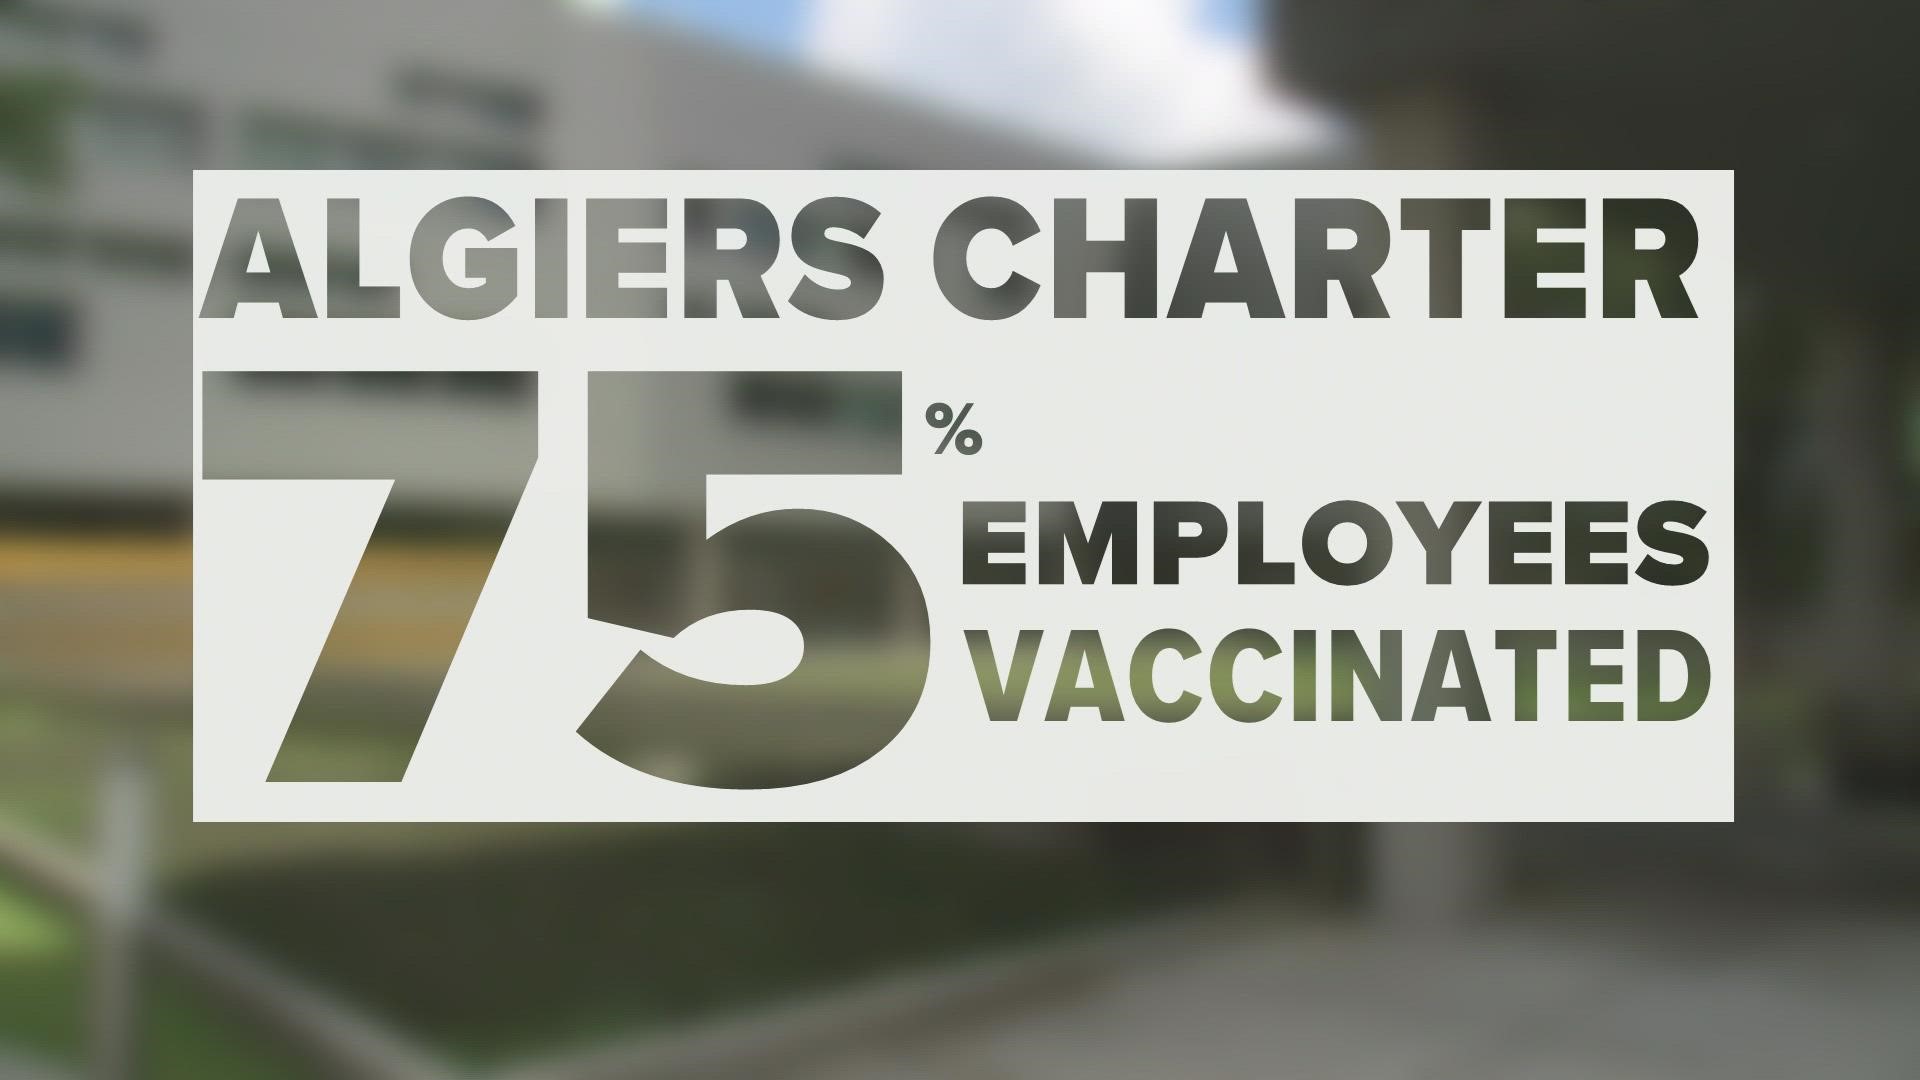 In efforts to keep students and staff safe, Algiers Charter schools are mandating masks and are hoping that more can getthe vaccine.